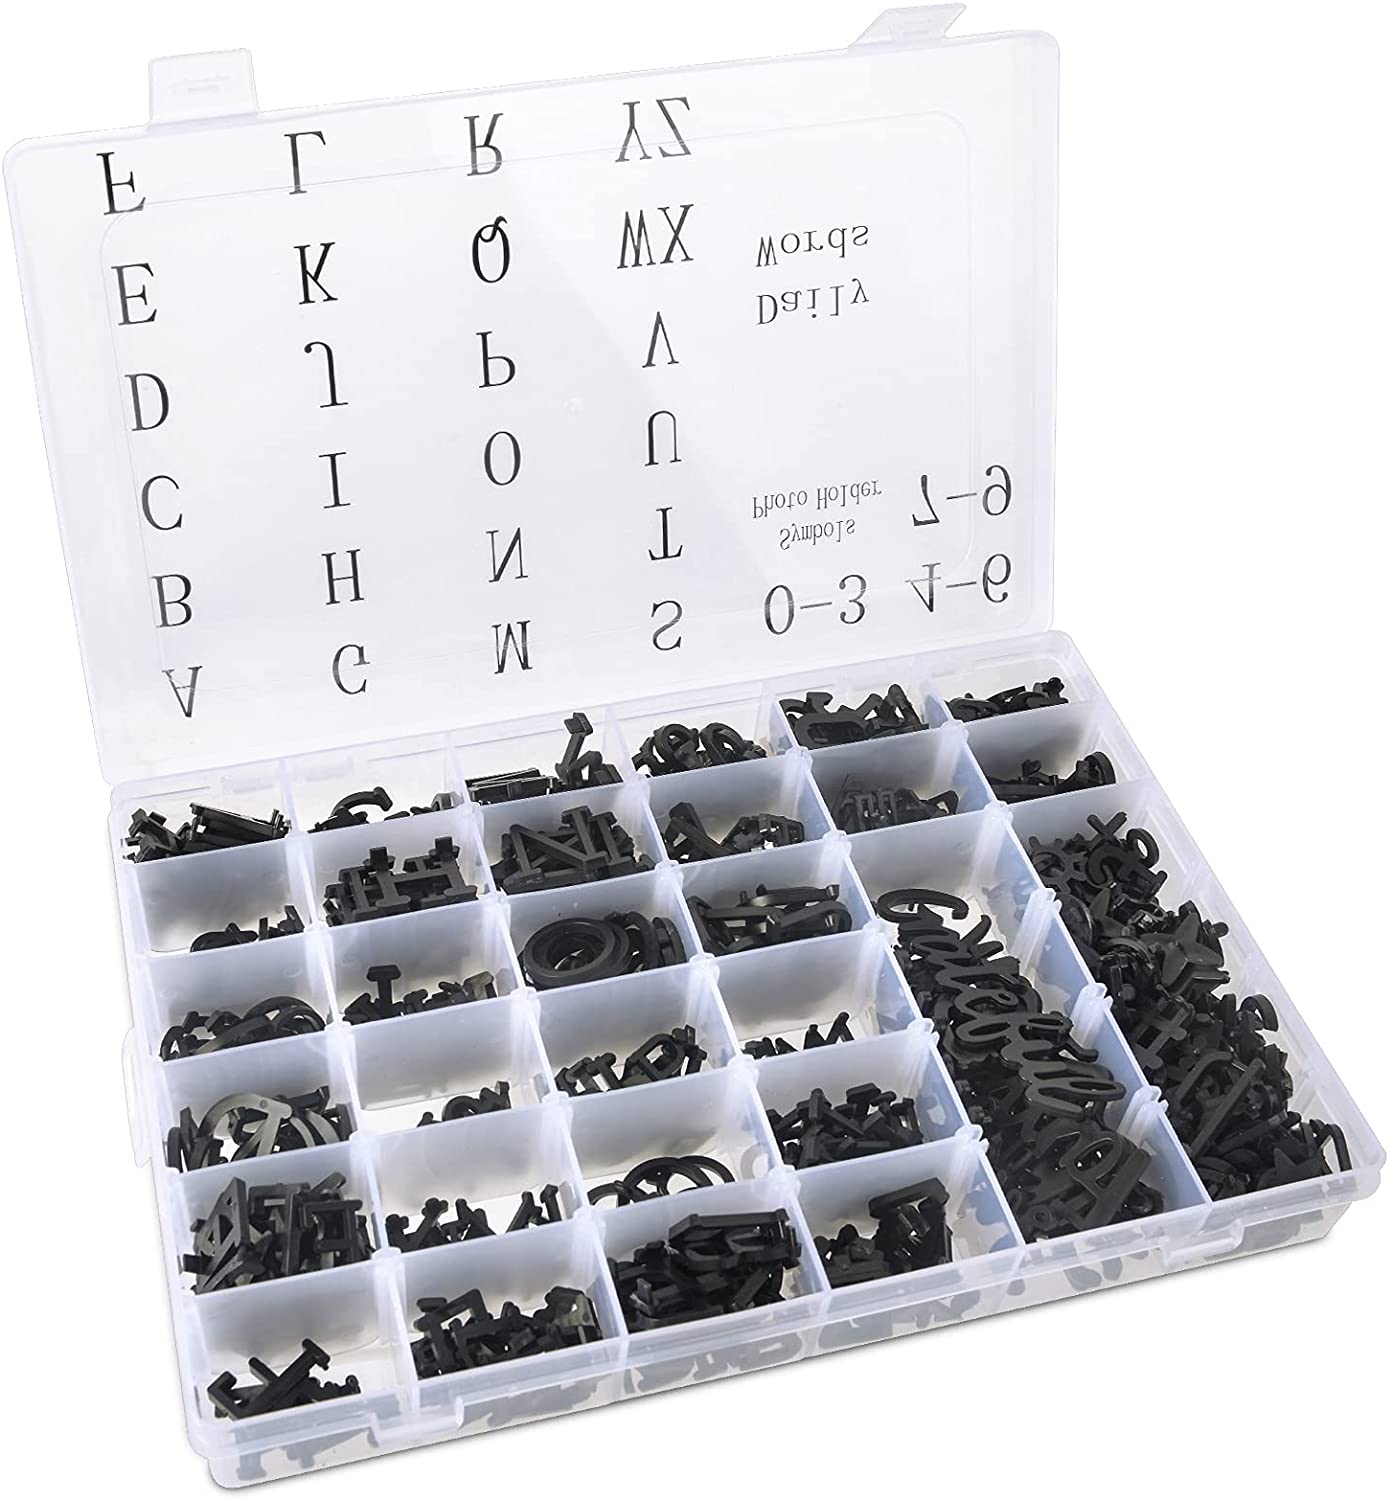 Letter Board Letters, 674 PRE-Cut Characters Letter Organizer Box (3/4 and 1 Inch) with Sorting Tray,Gold